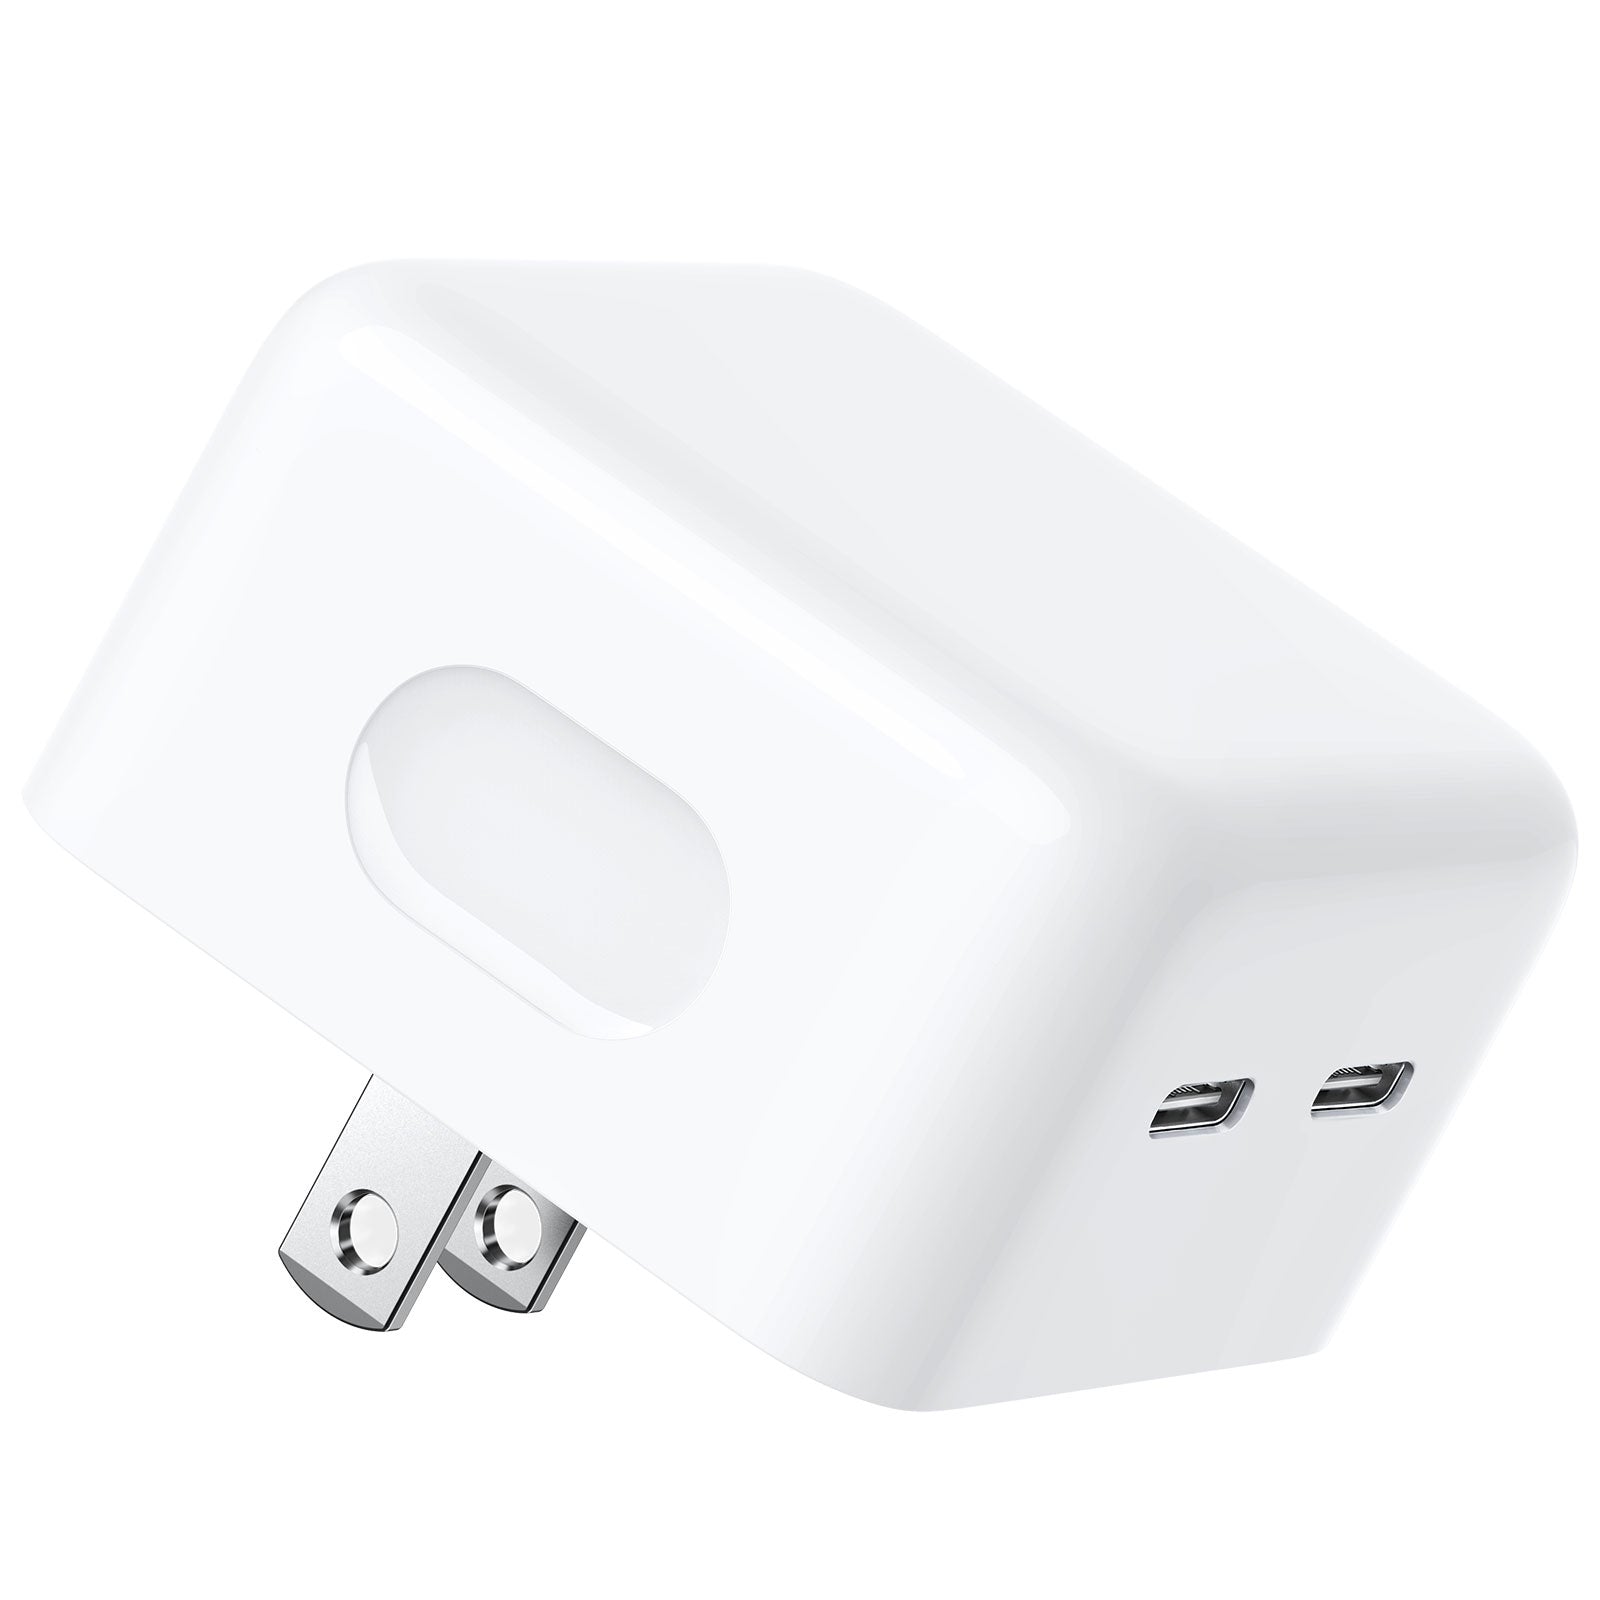 L-2P351 35W Dual USB-C Wall Charger, PD 3.0 35W Foldable USB Plug iPad Charger Cube for iPhone 13/ iPhone 13 Pro Max/iPhone 12/11, iPad and More (Cable Not Included)